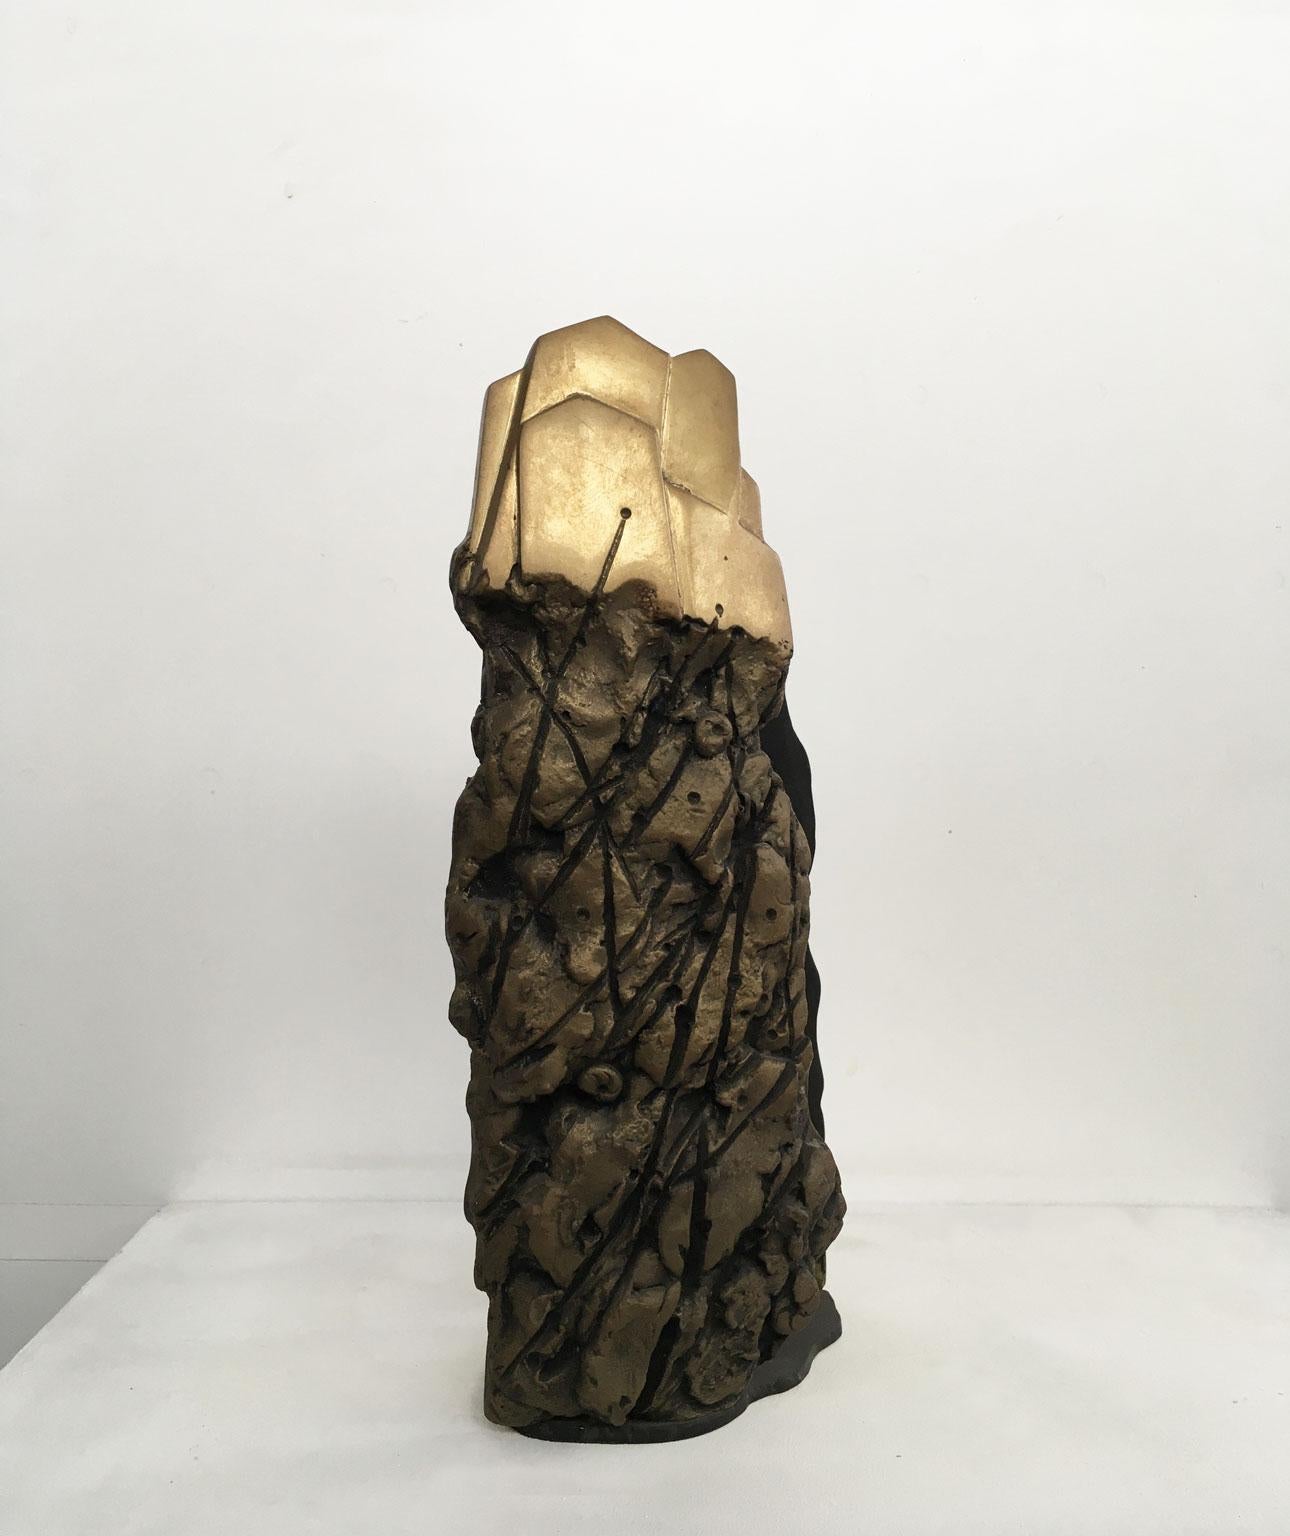 This very interesting abstract bronze sculpture, it is one of a kind artwork, created in 1979 by the Italian artist Graziano Pompili, 
The title "Paesaggio con ombra", is translated in "Landscape with shadow"
This bronze sculpture can be useful as